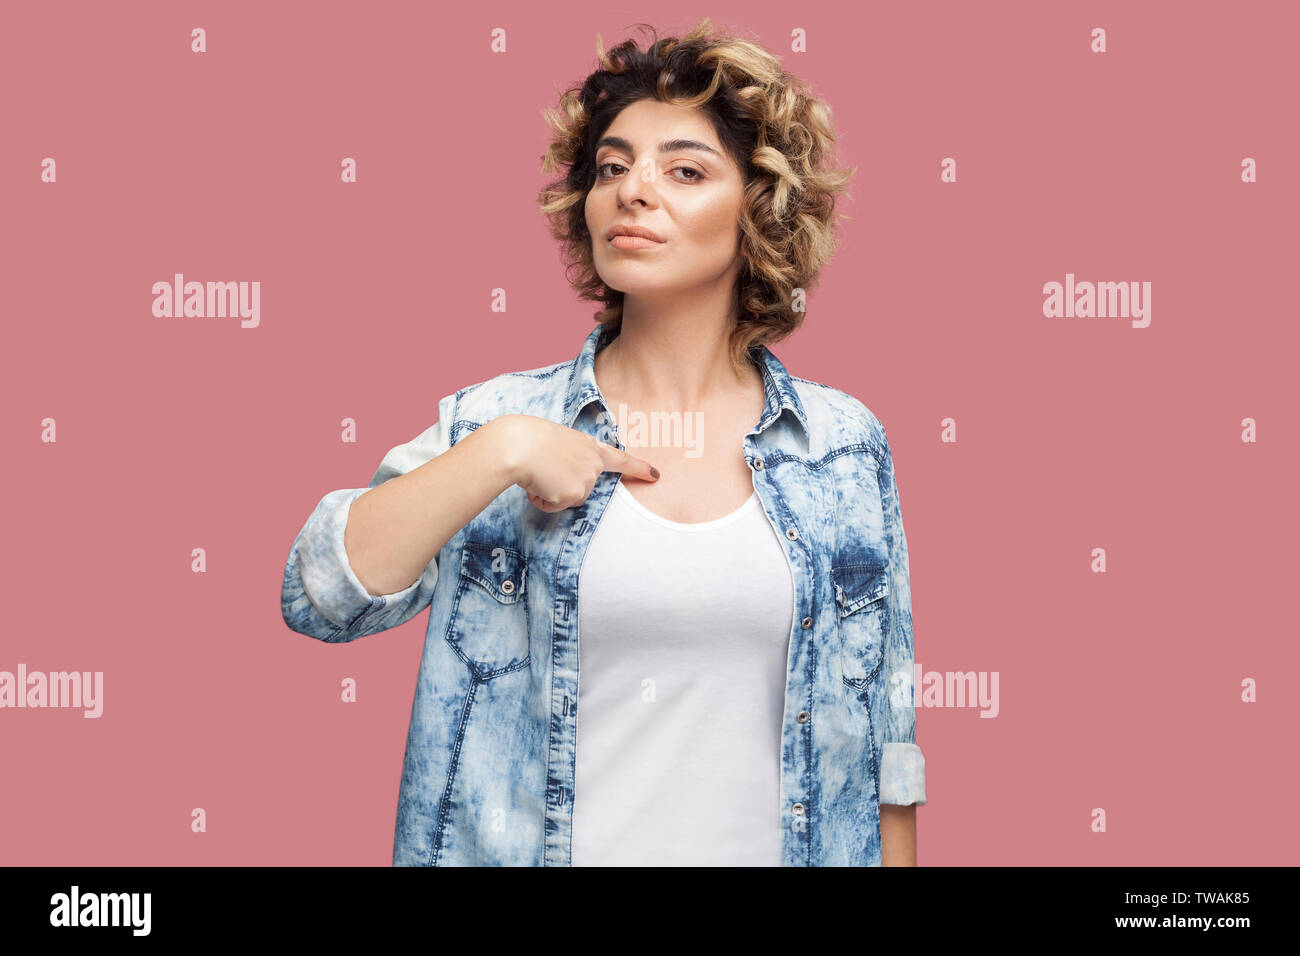 This is me. Portrait of serious young woman with curly hairstyle in casual blue shirt standing, pointing herself with proud face and looking at camera Stock Photo